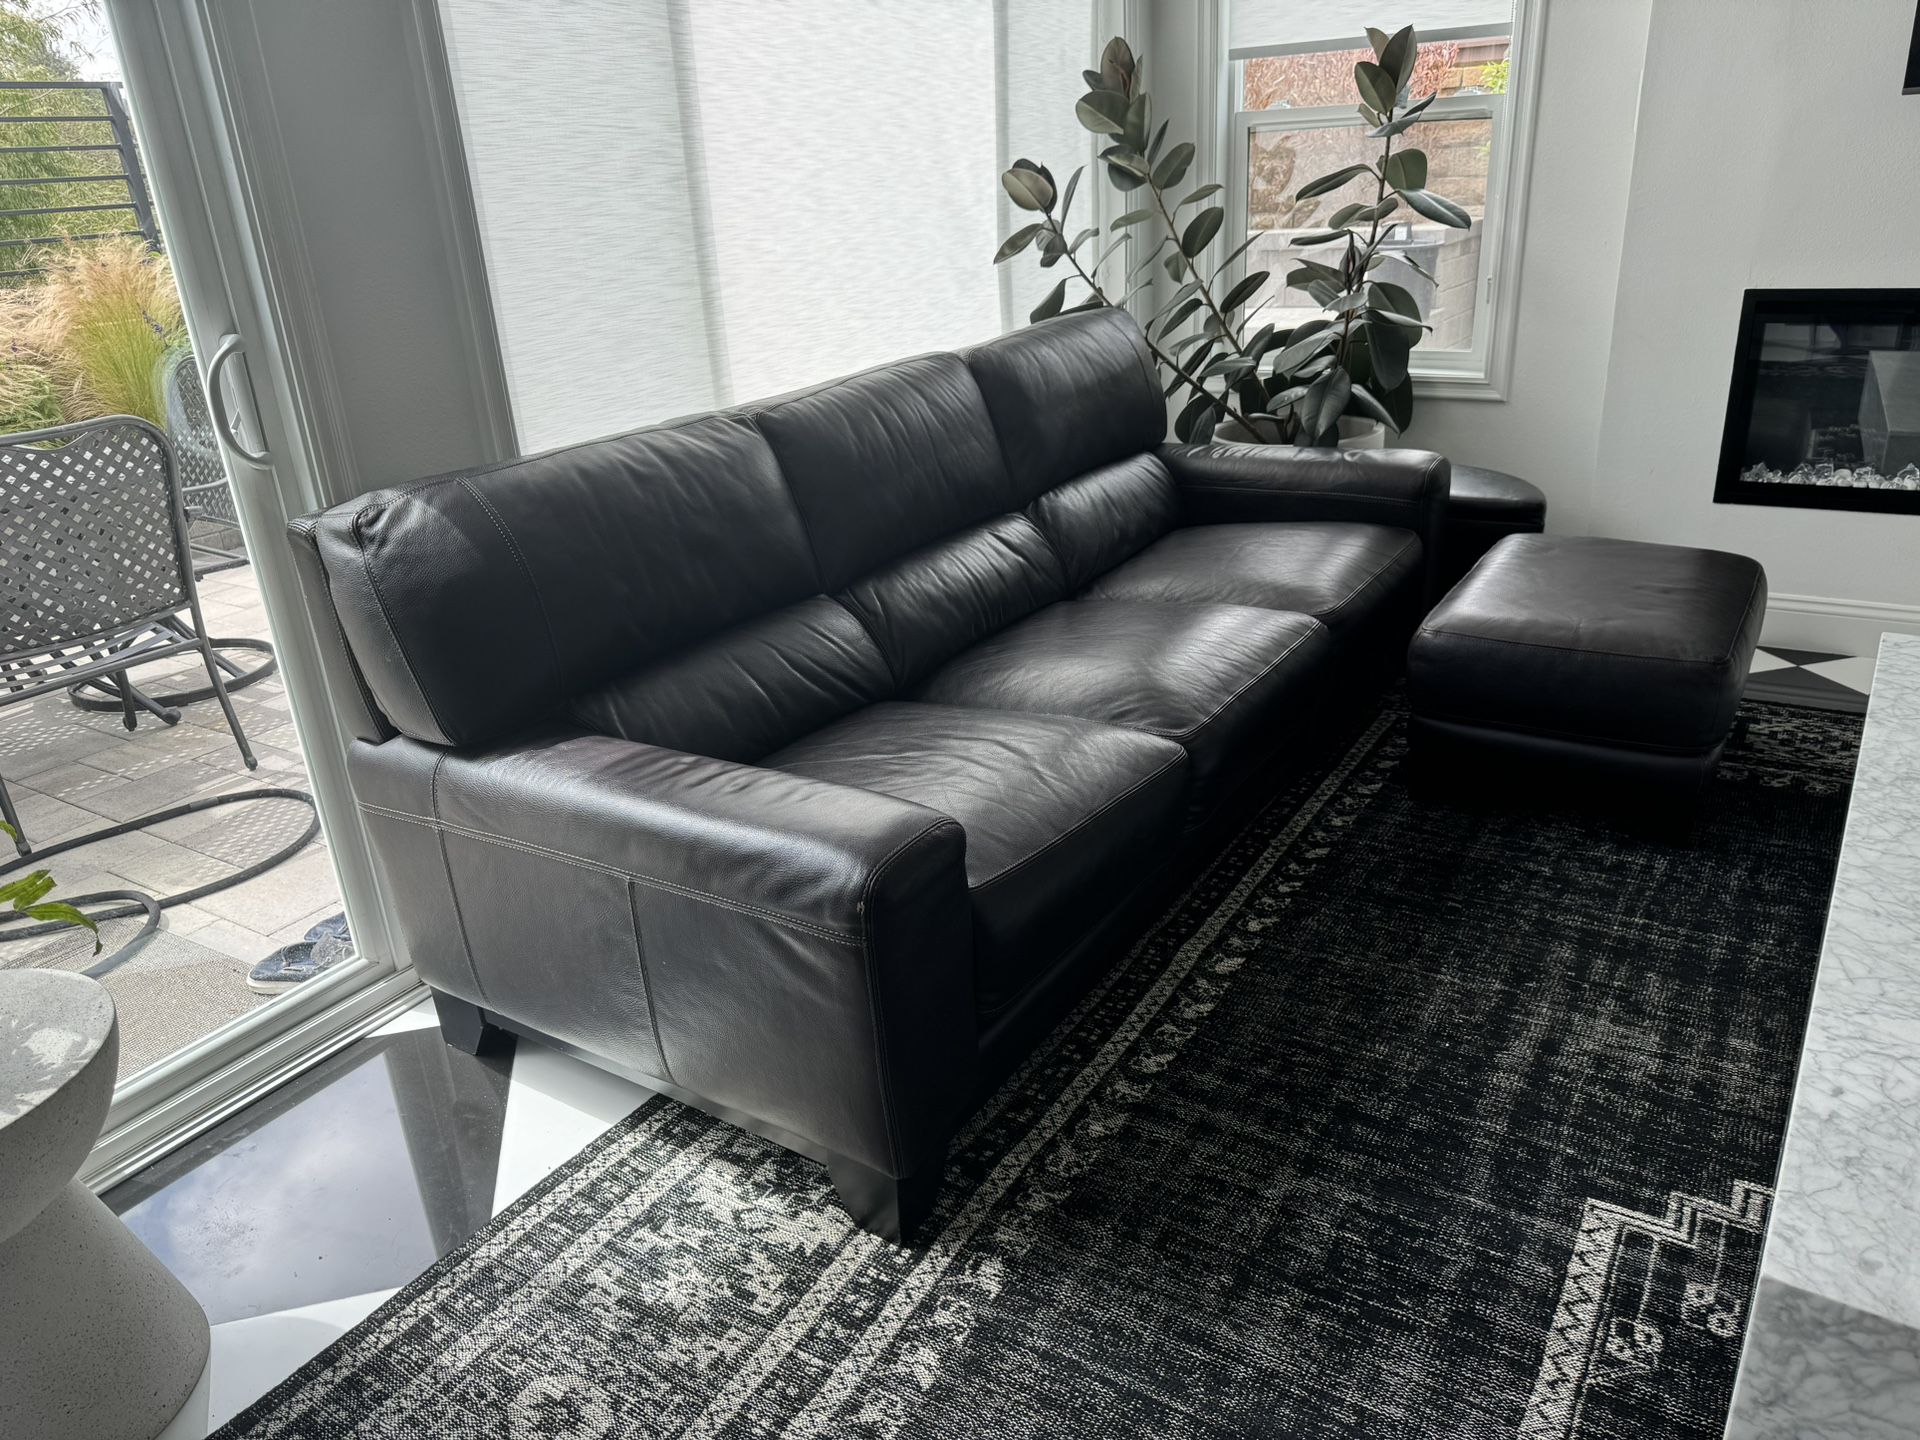 Premium Leather Sofa Set with Ottomans - Exceptional Condition